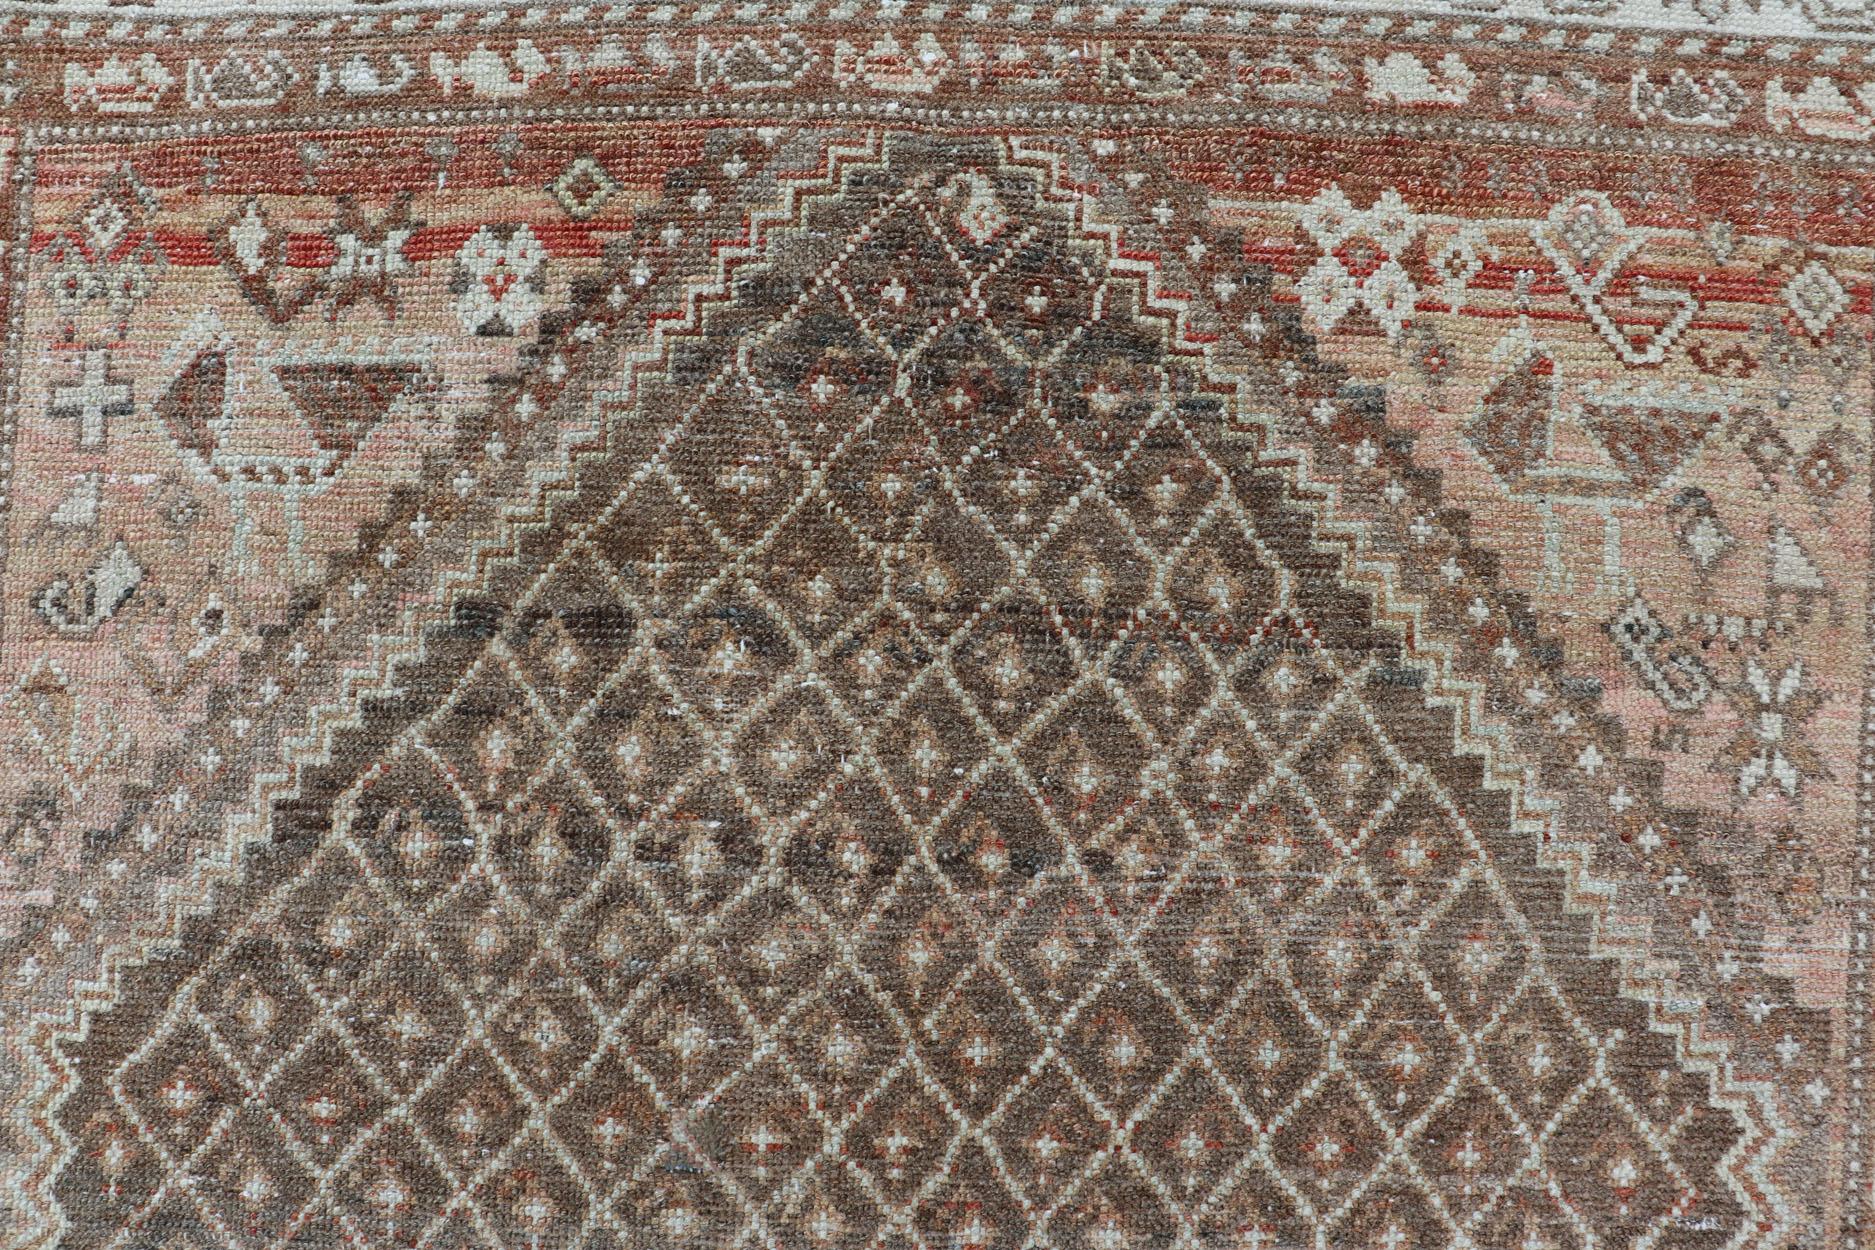 Softly colored antique distressed Persian Kurdish with all-over tribal design in soft colors of gray, charcoal, brown, tan cream, green , rug EMB-8529-178682, country of origin / type: Iran / Kurdish, circa 1910.

This antique distressed Kurdish